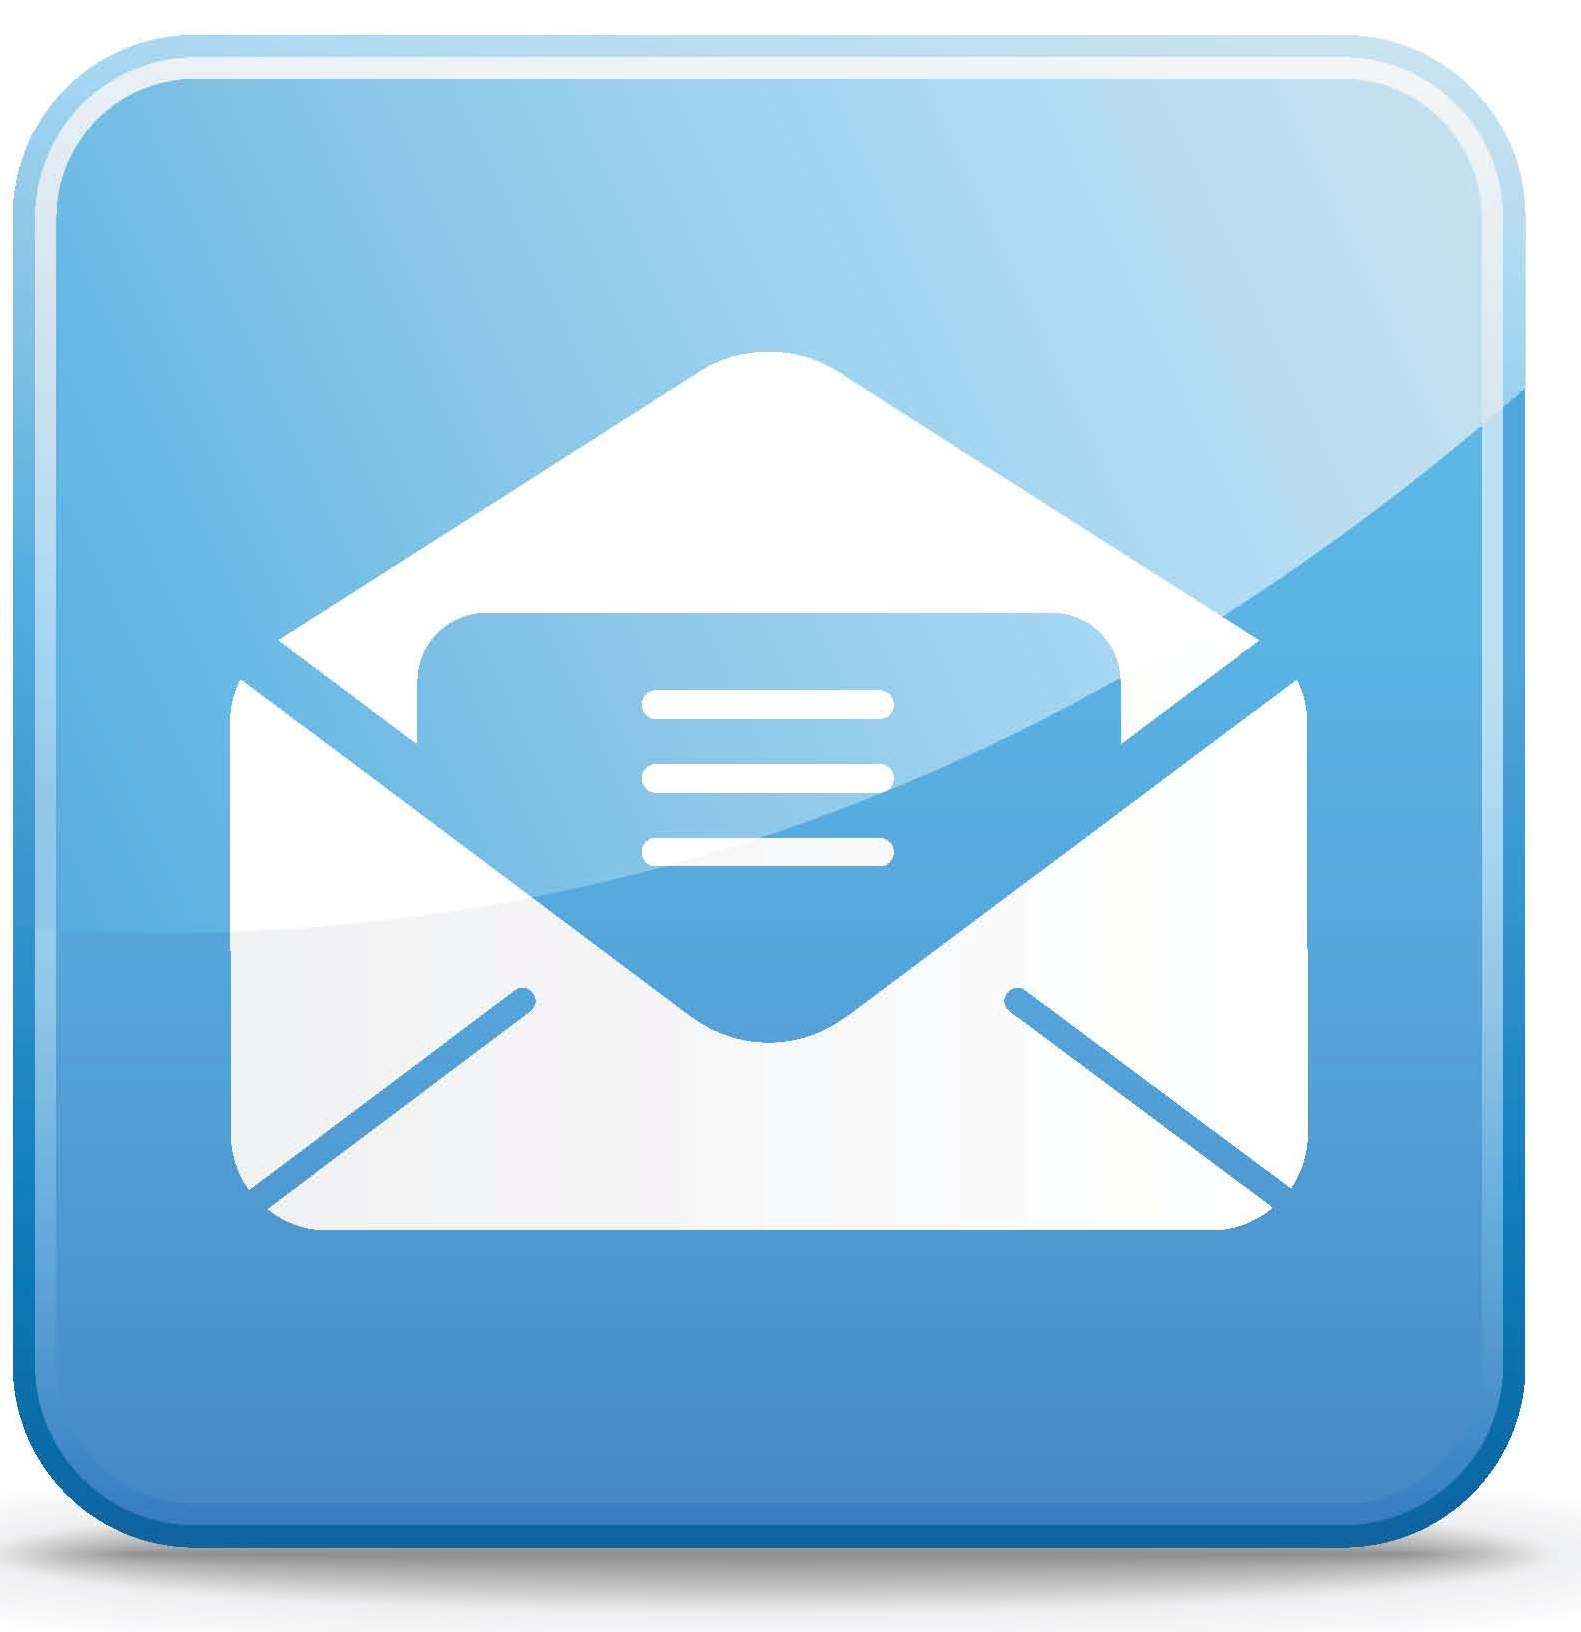 email-icon.jpg